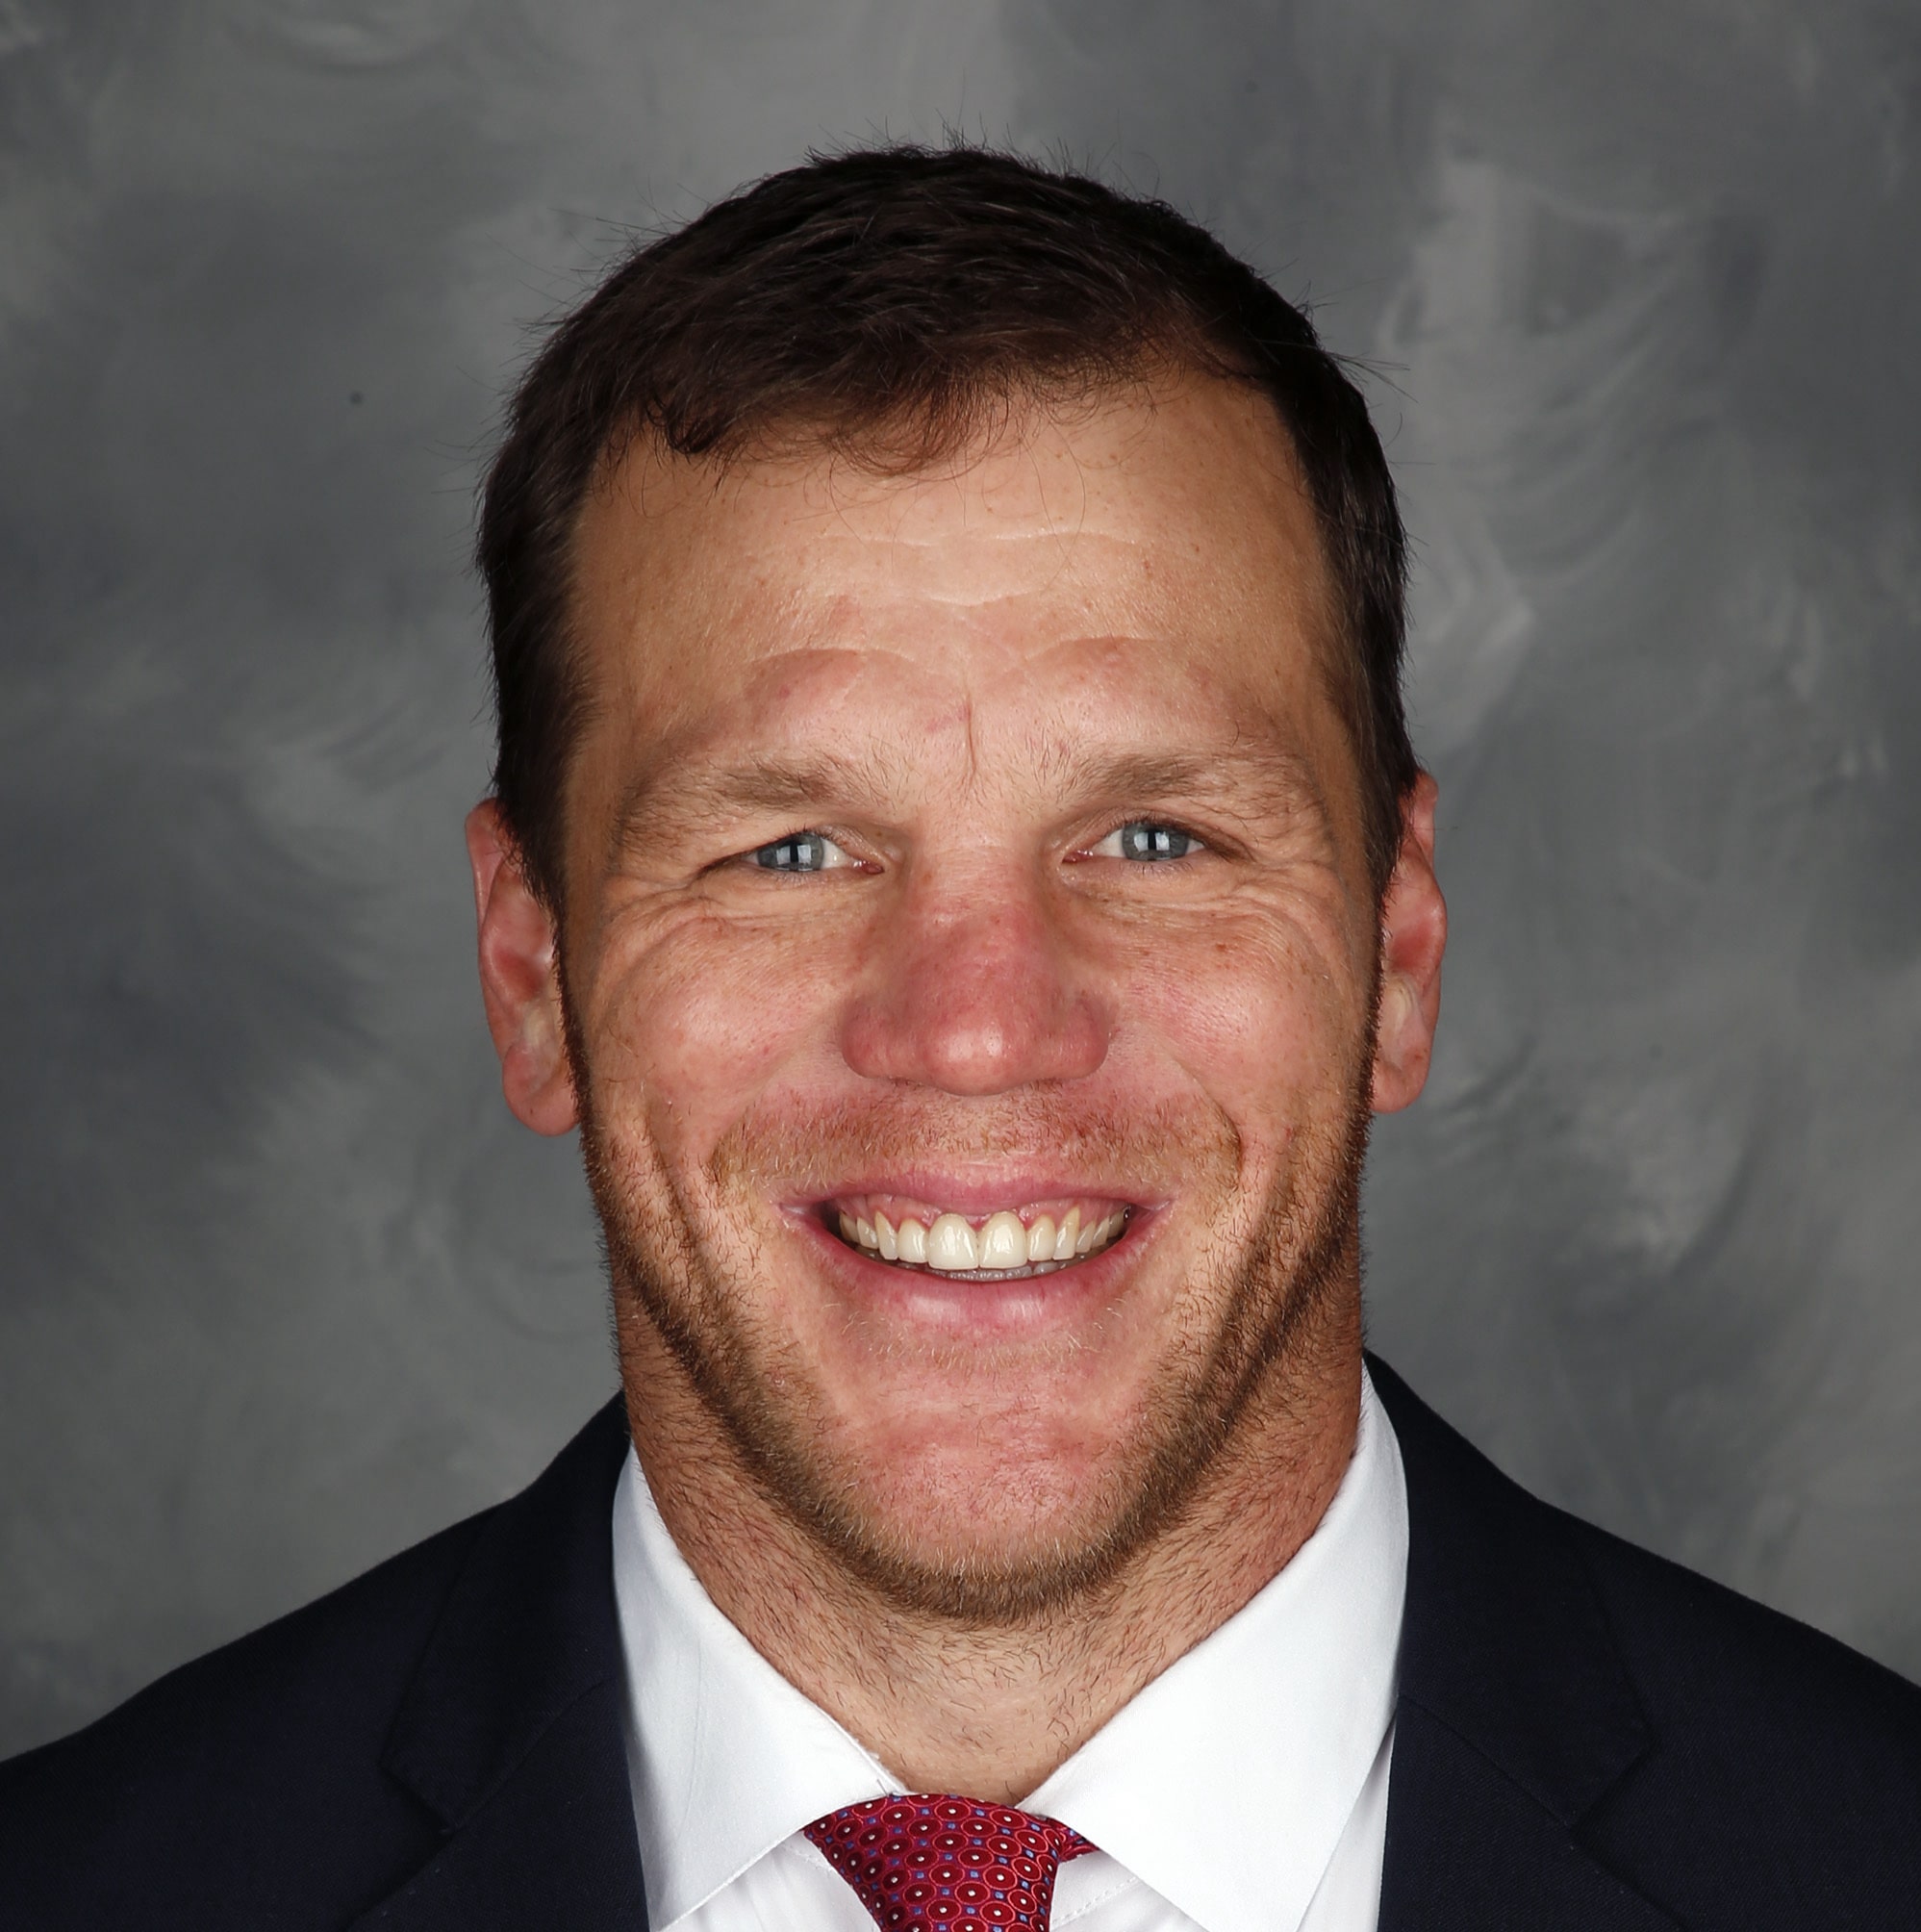 Cover image of Shawn Thornton